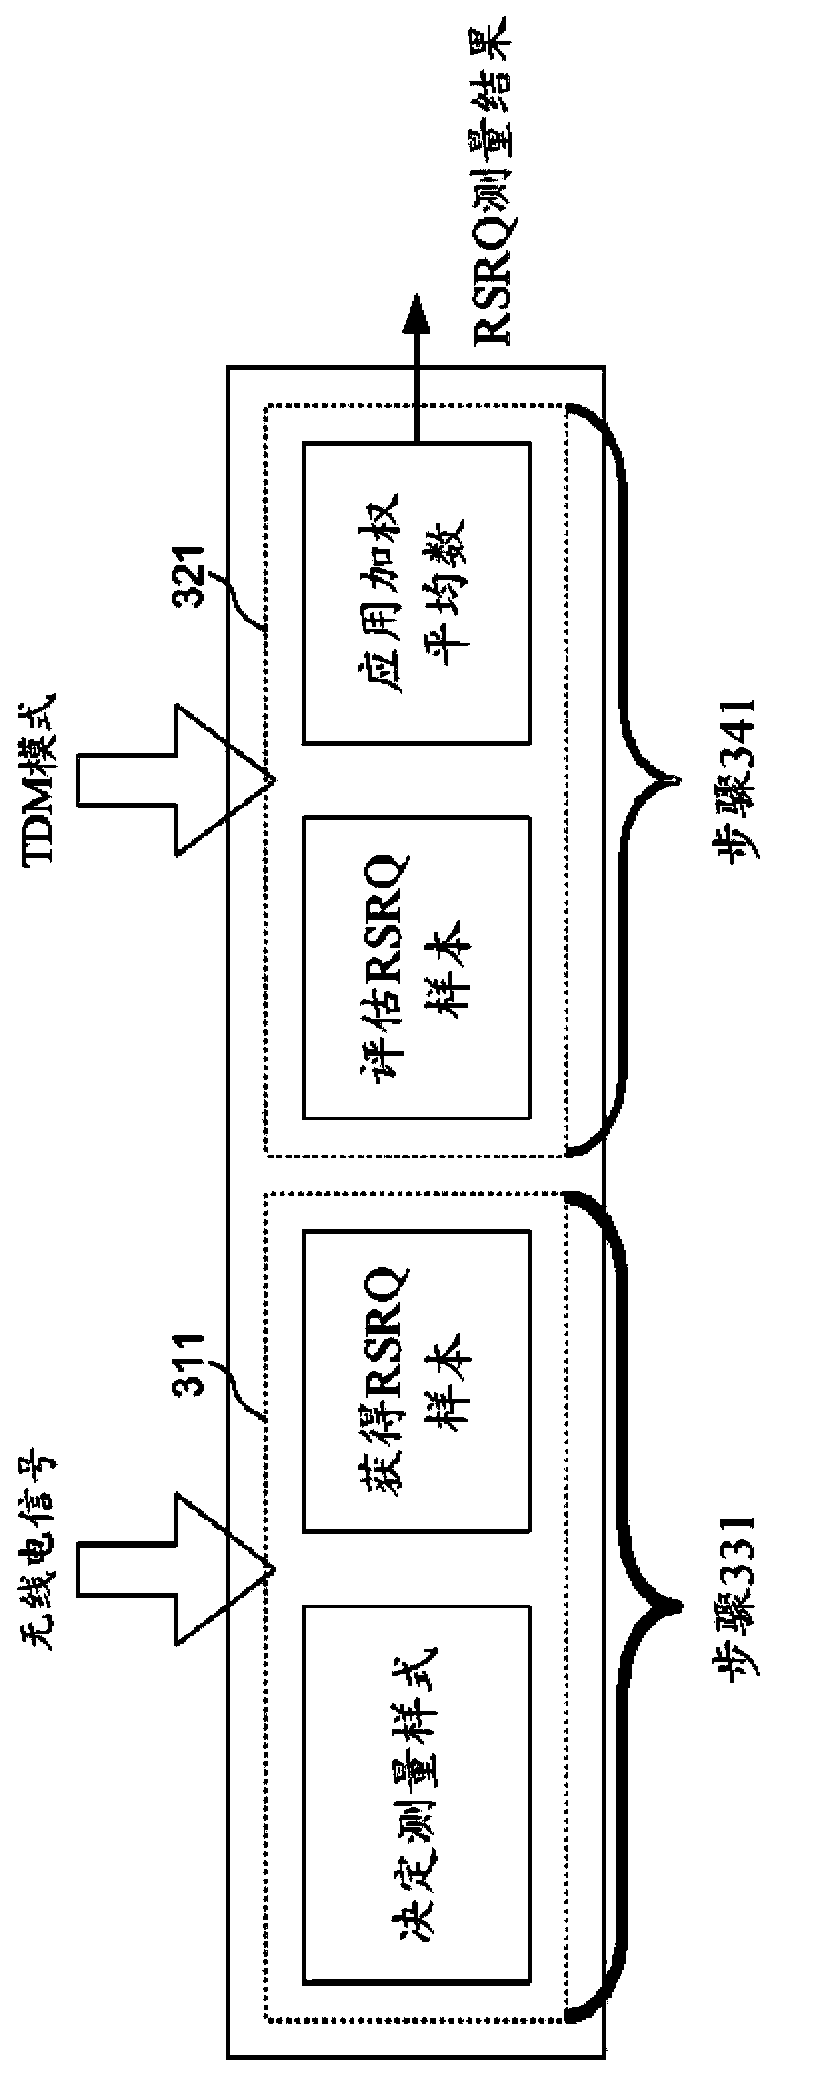 Method of UE RSRQ measurement precuation for interference coordination